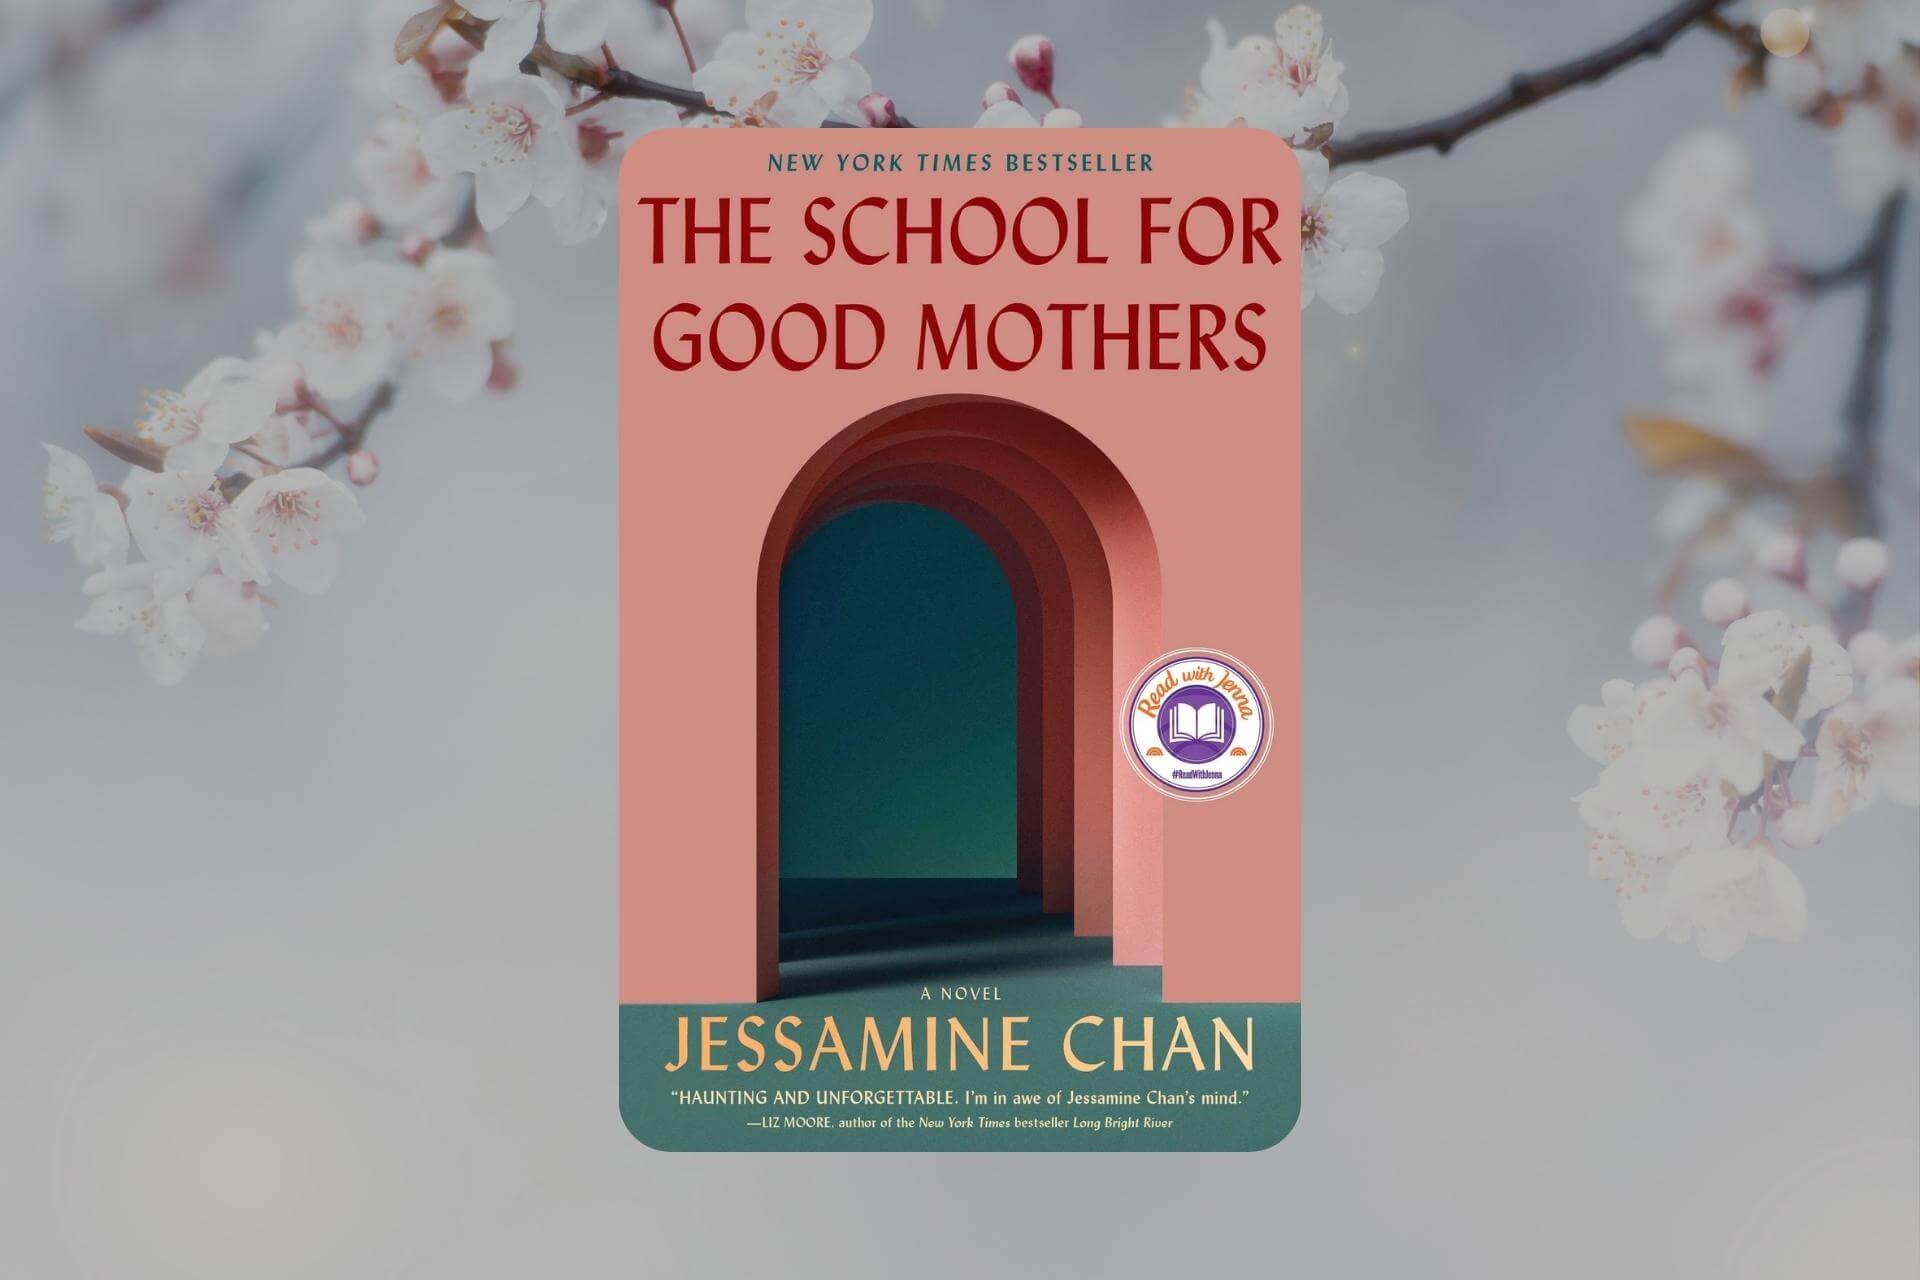 Review: The School for Good Mothers by Jessamine Chan